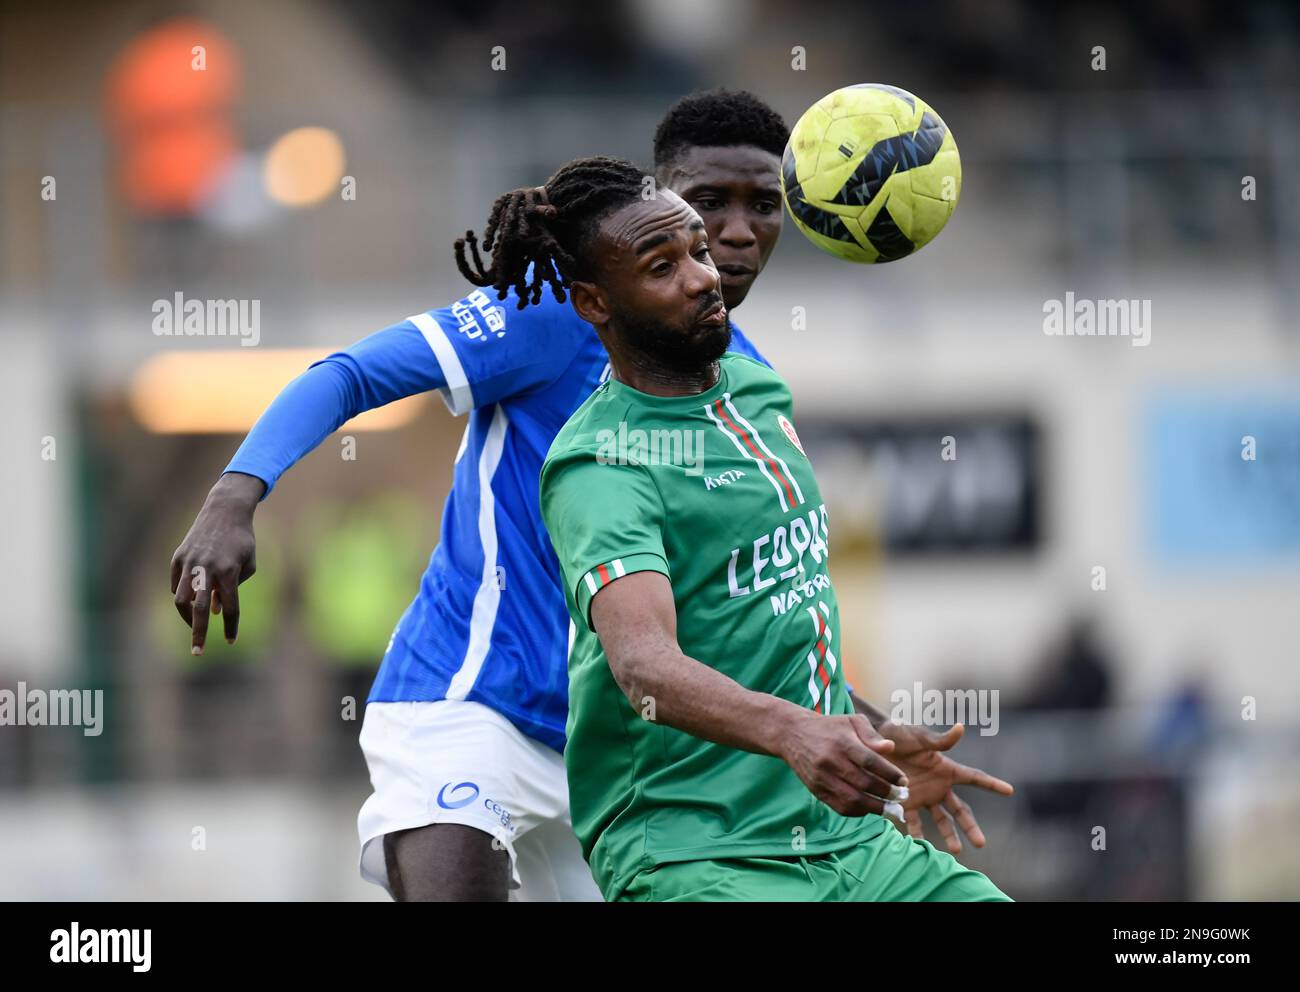 Virton's Illombe Mboyo and Jong Genk's Ibrahima Sory Bangoura fight for the ball during a soccer match between RE Virton and Jong Genk, Sunday 12 February 2023 in Virton, on day 22 of the 2022-2023 'Challenger Pro League' 1B second division of the Belgian championship. BELGA PHOTO JOHN THYS Stock Photo